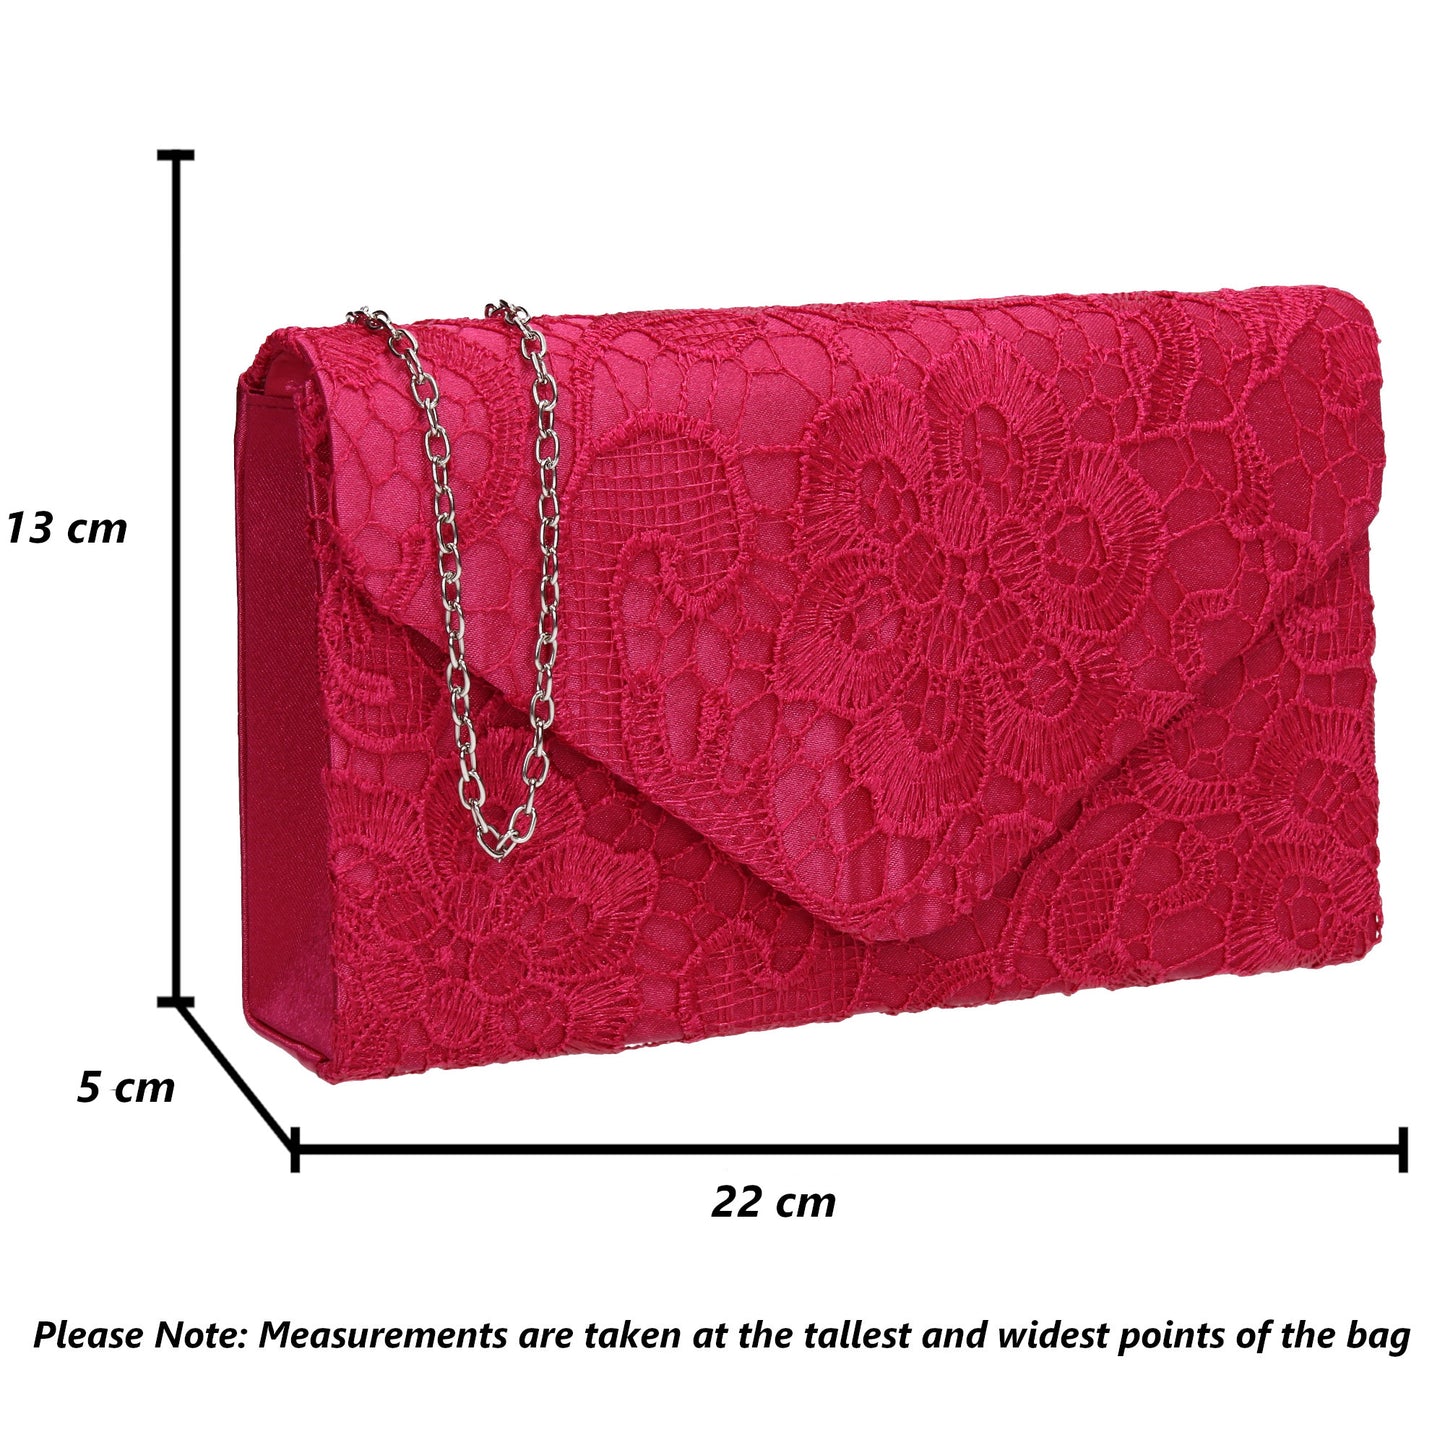 Holly Lace Clutch Bag Fuchsia Pink